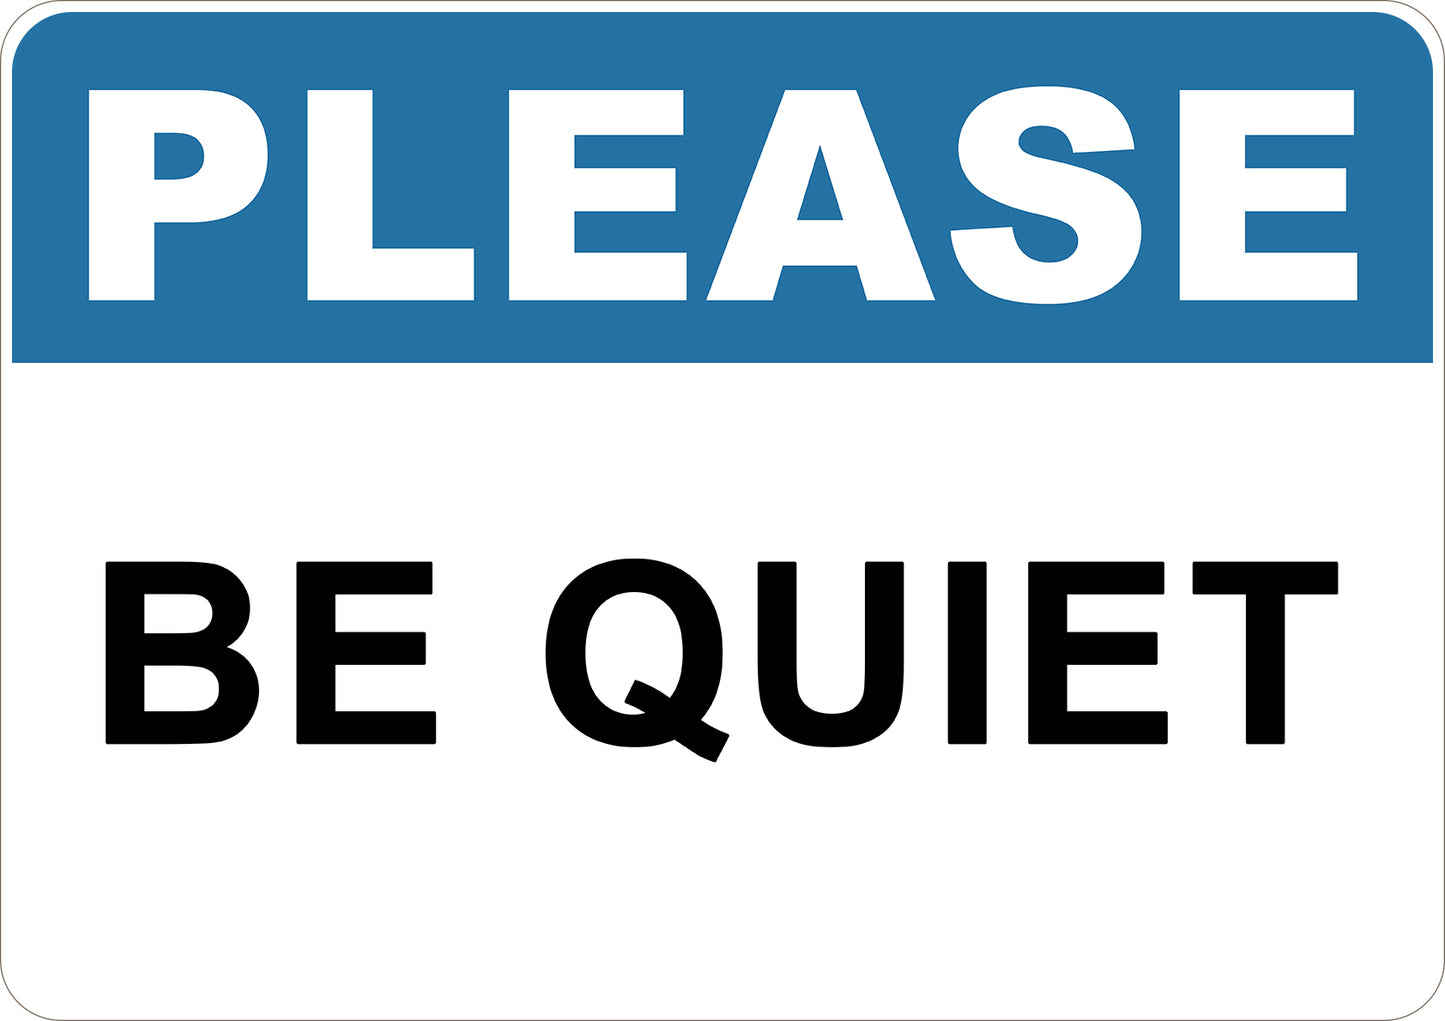 Please Be Quiet Printed Sign